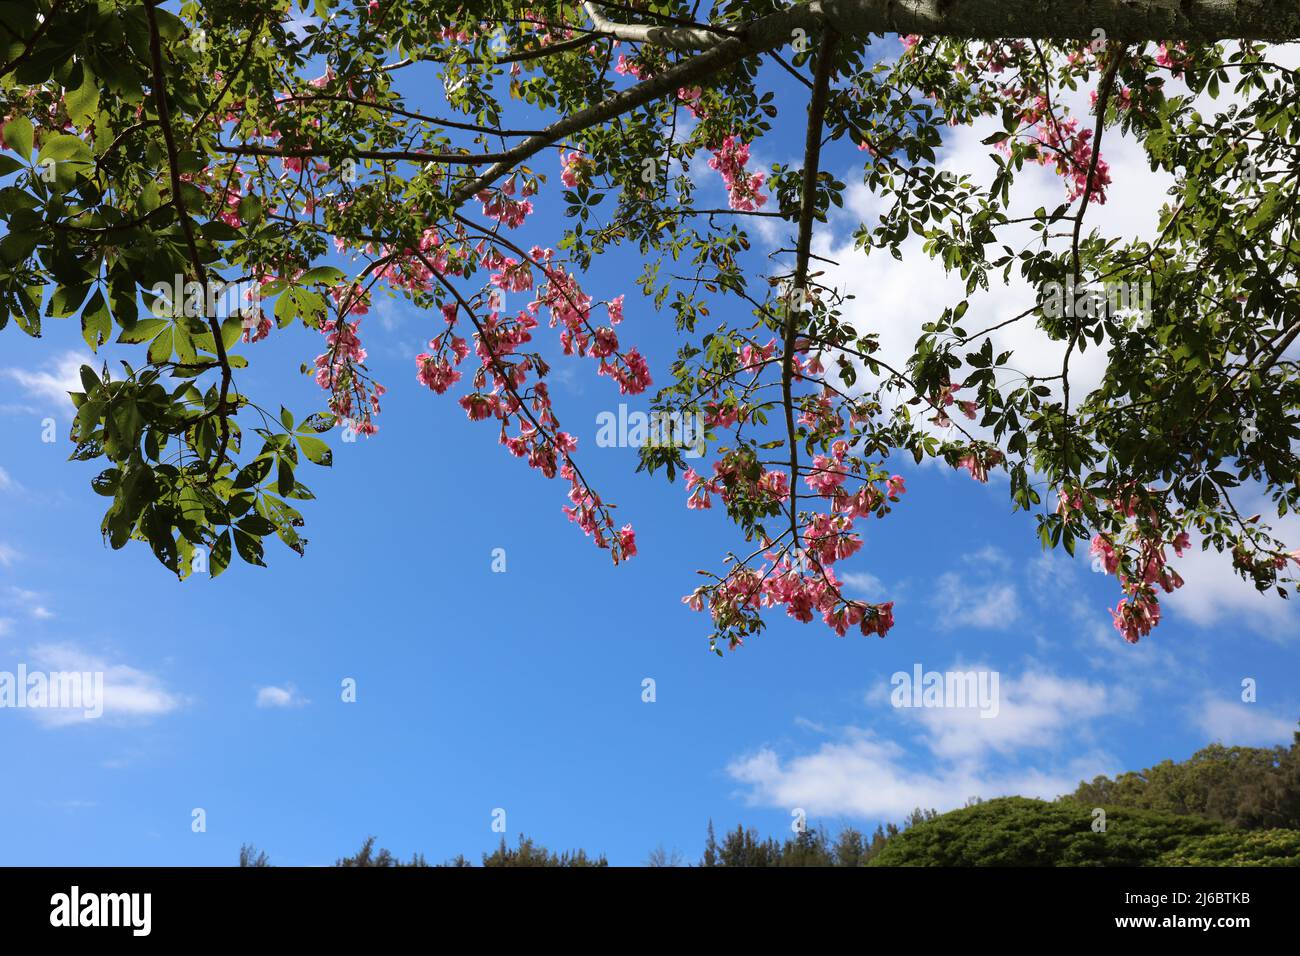 Looking up through the flowering branches of a Long John Tree, Triplaris weigeltiana, to a beautiful blue sky with fluffy white clouds in Kauai, Hawai Stock Photo